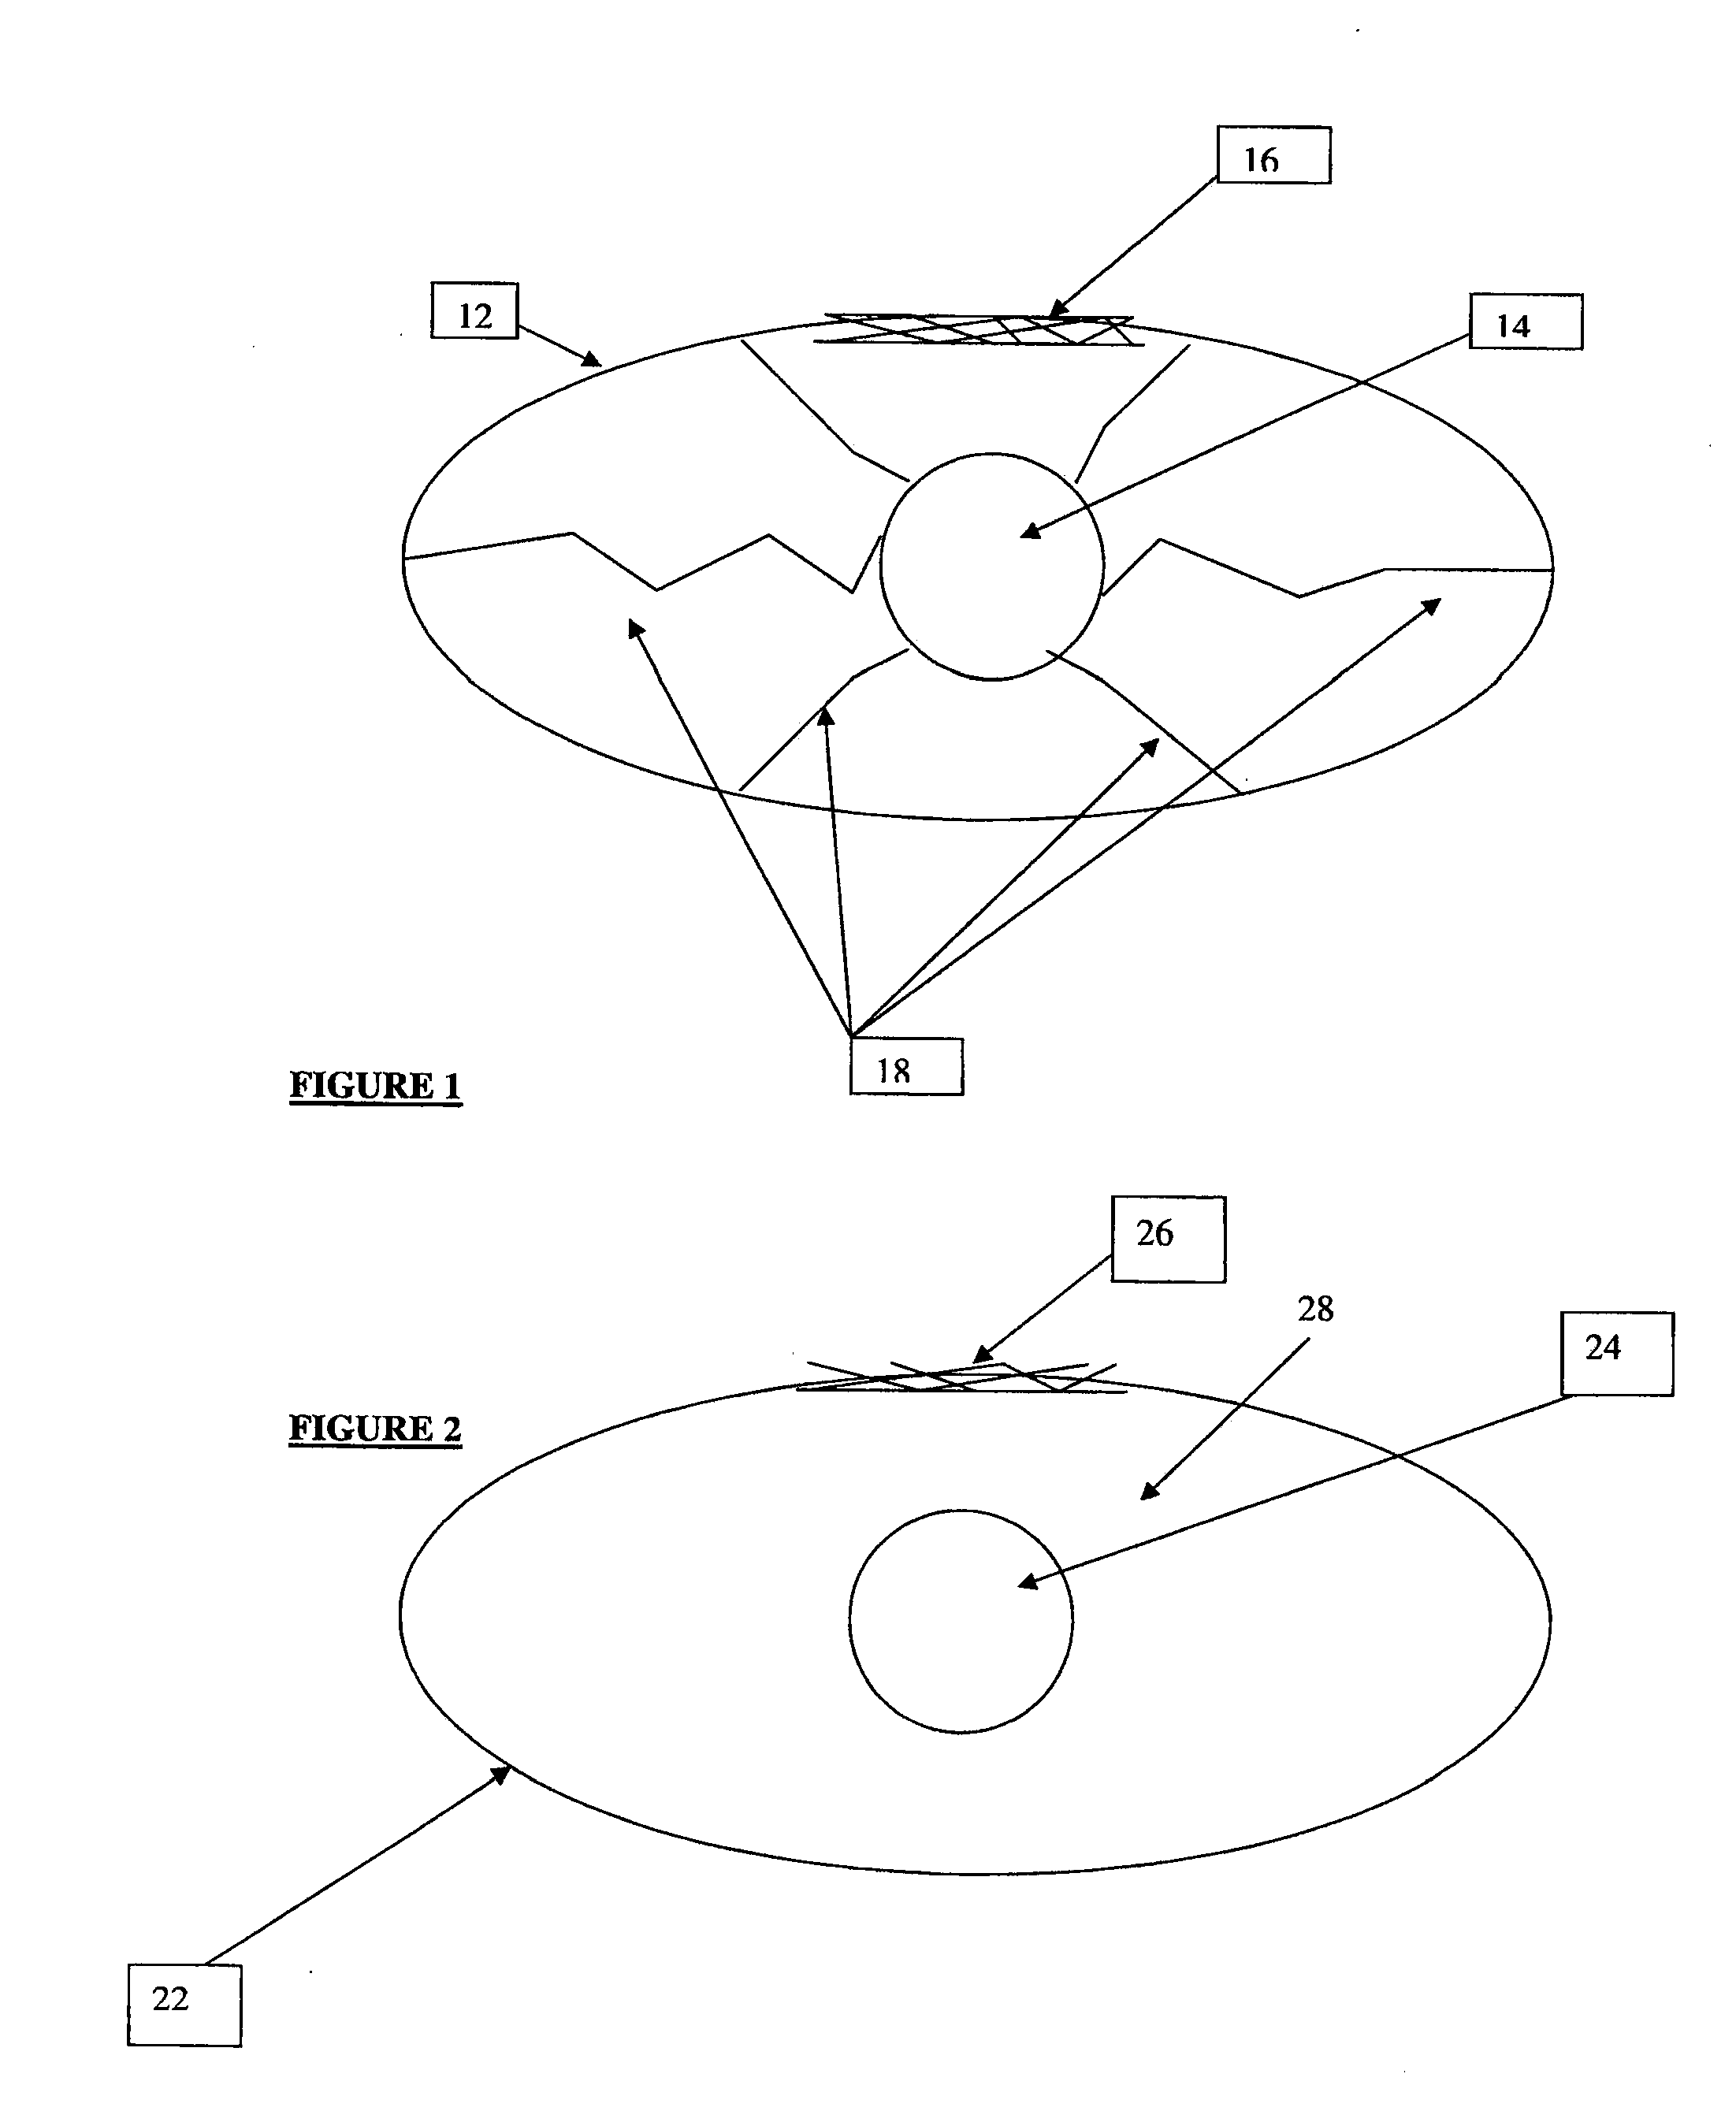 Electronics module support system for use with sports objects